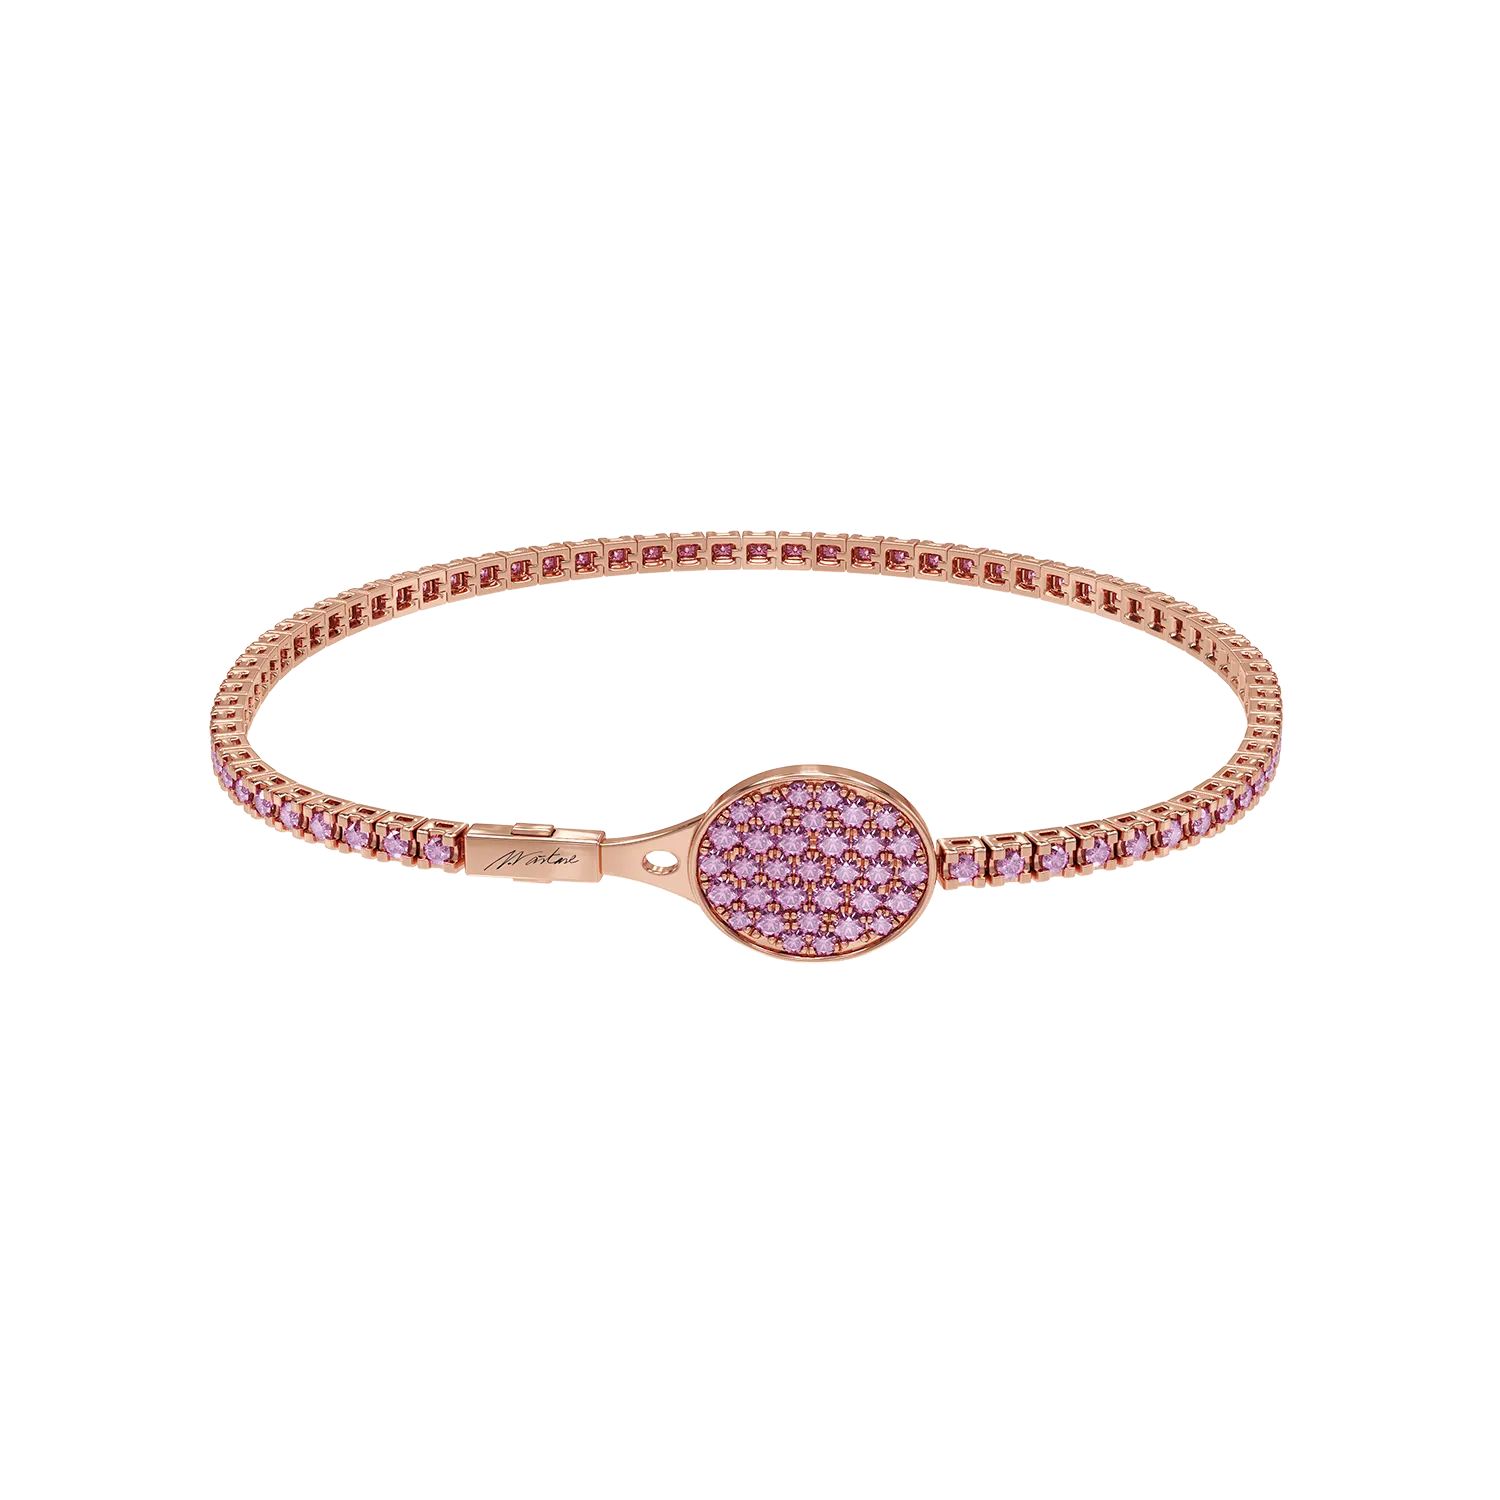 Glory tennis bracelet with 1.504ct pink sapphires